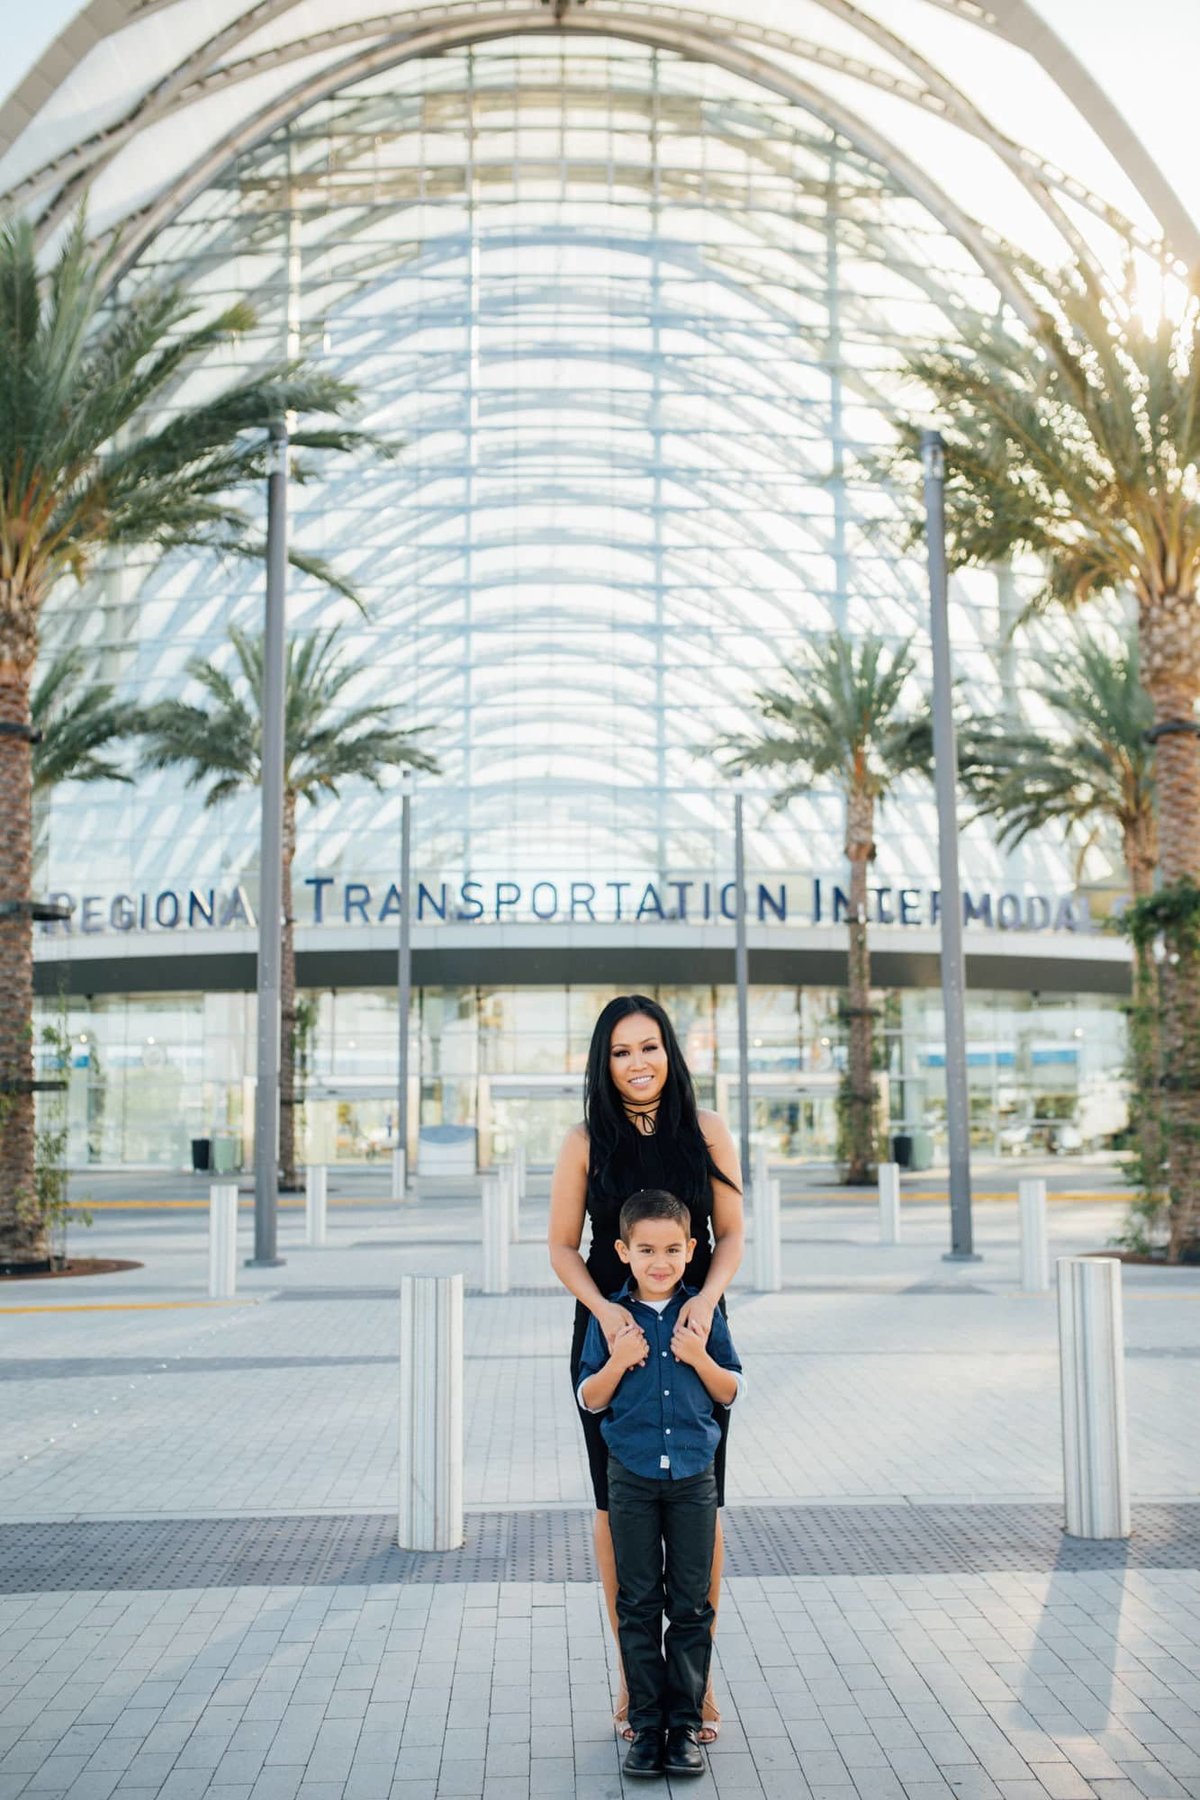 A mother stands behind her young son during a photo session at the ARTIC Train Station in Anaheim